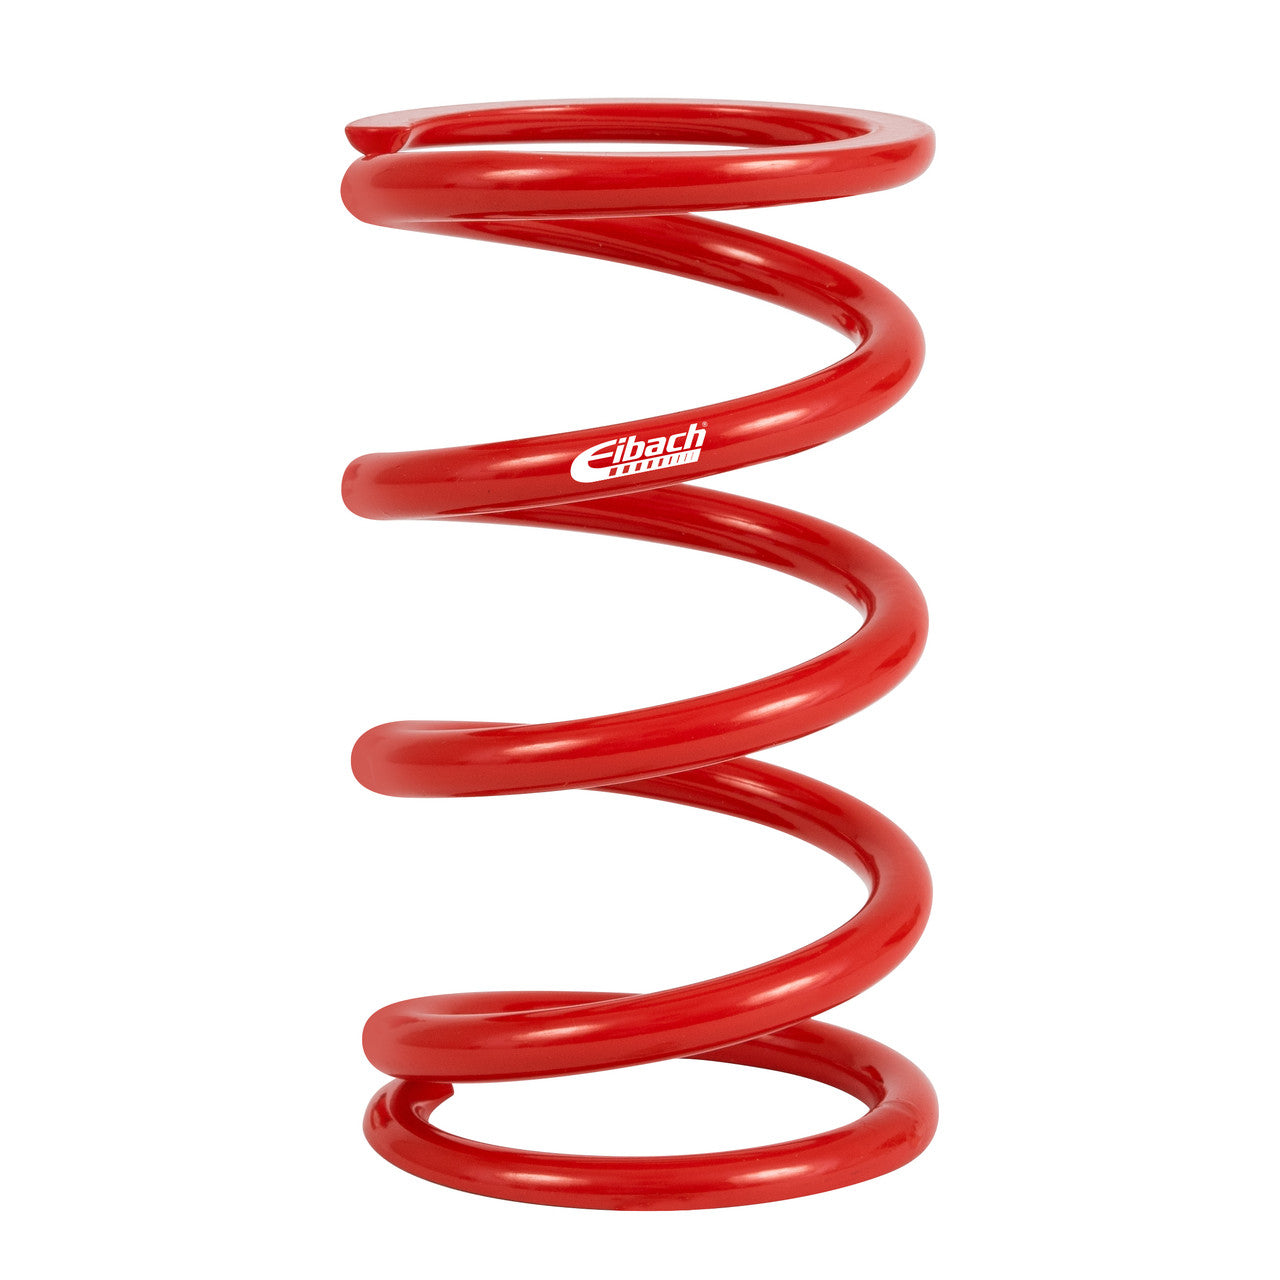 Eibach Metric Coilover Spring - 60MM I.D. 170-60-0170